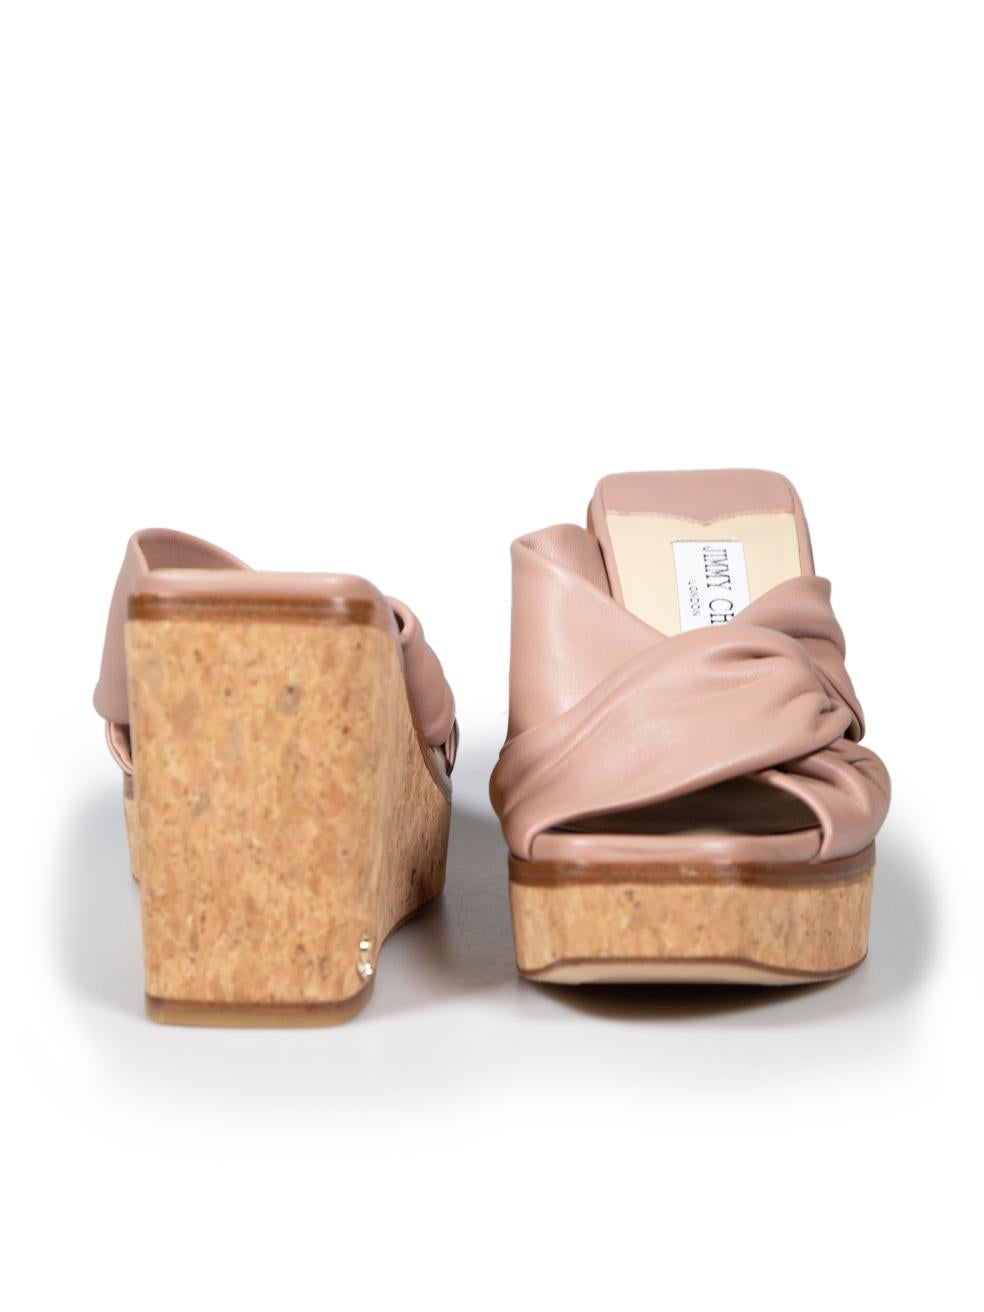 Jimmy Choo Pink Leather Cork Wedges Size IT 37 In Good Condition For Sale In London, GB